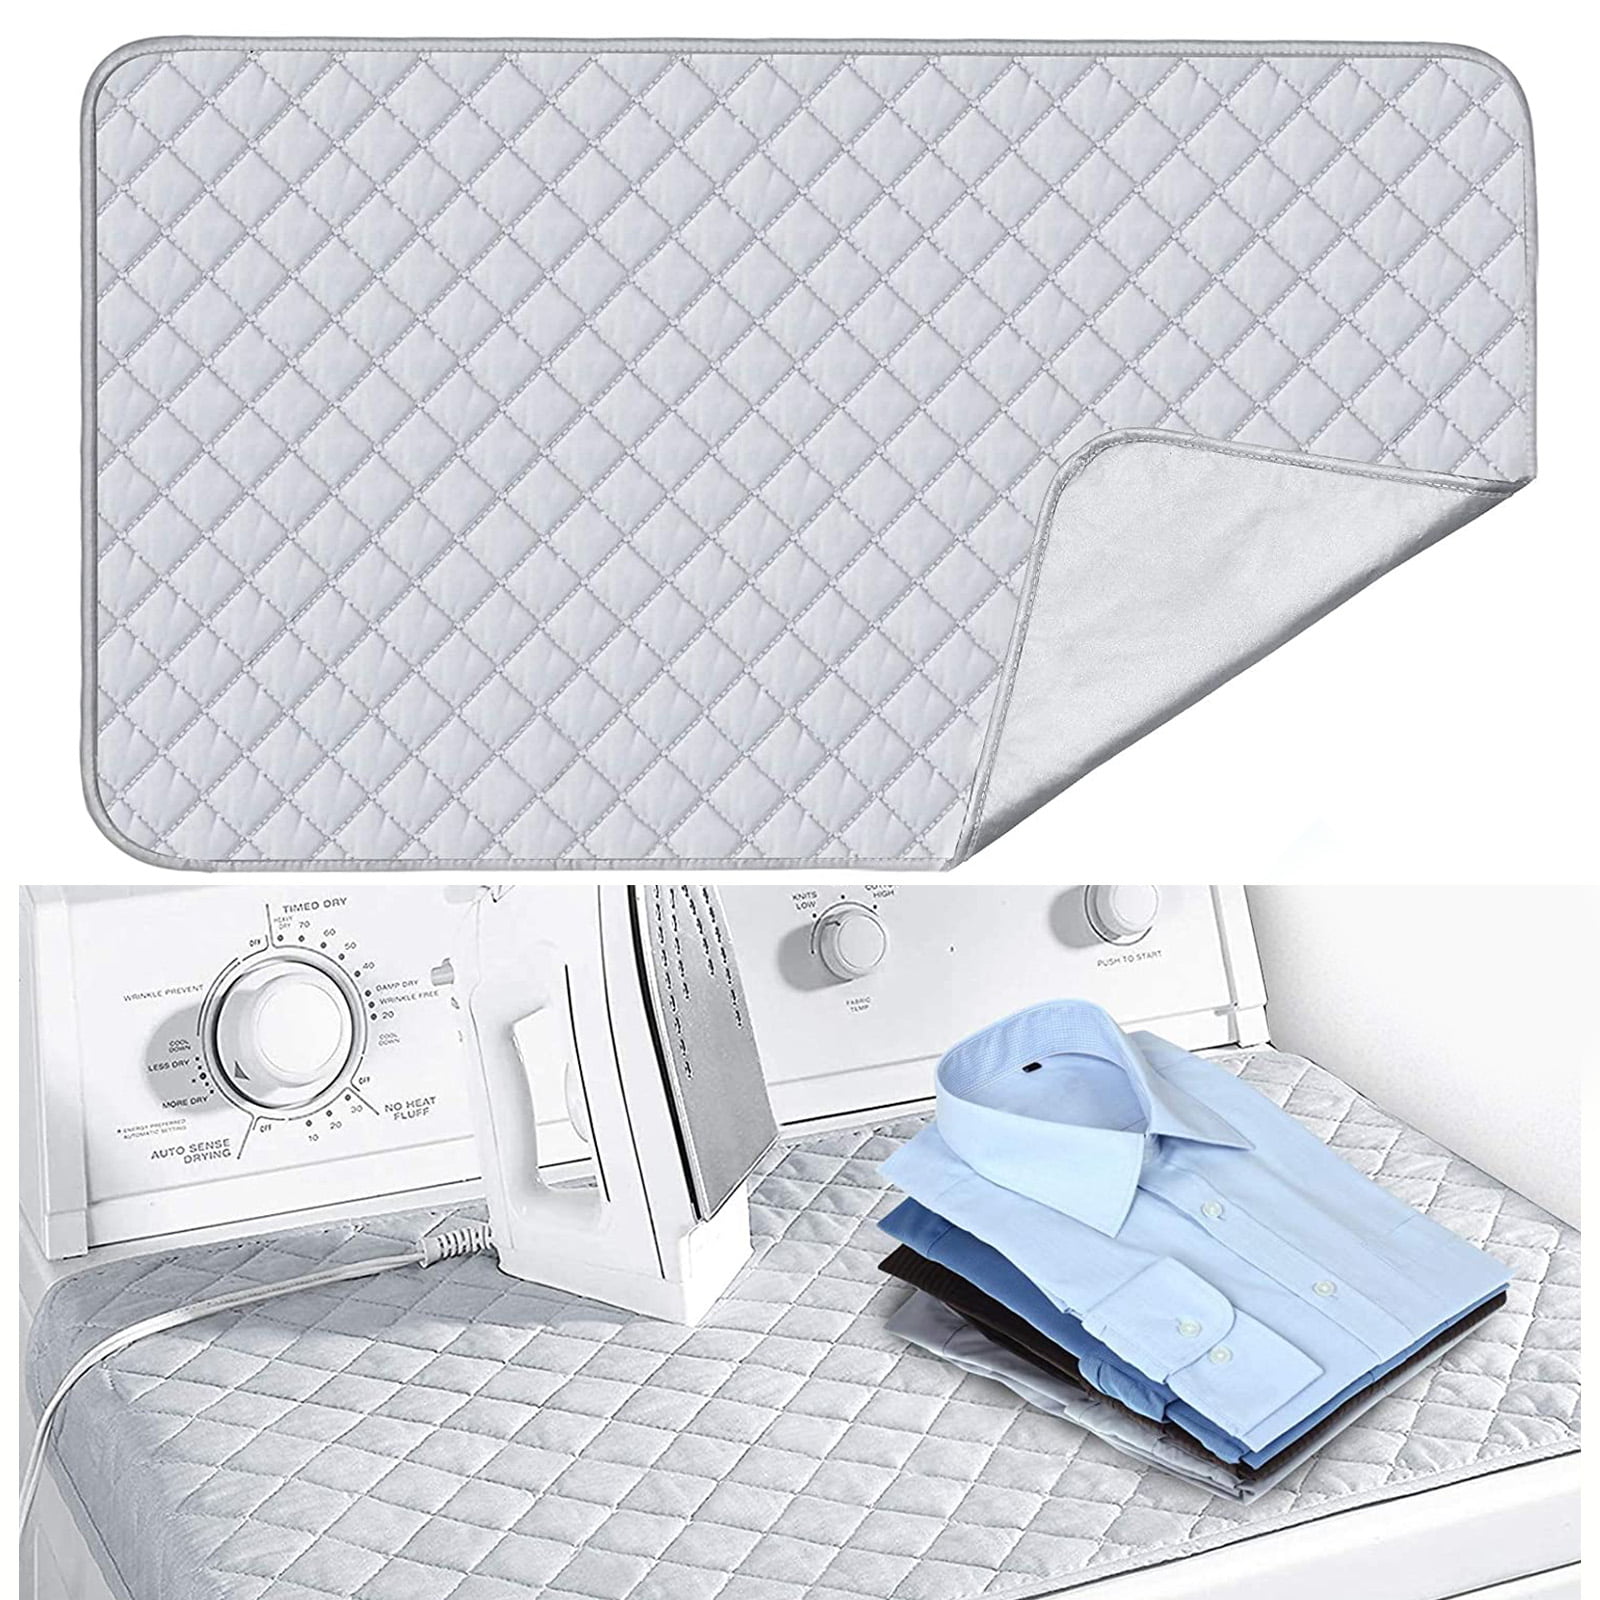 New Ironing Mat Laundry Pad Washer Dryer Cover Board Heat Resistant Blanket 